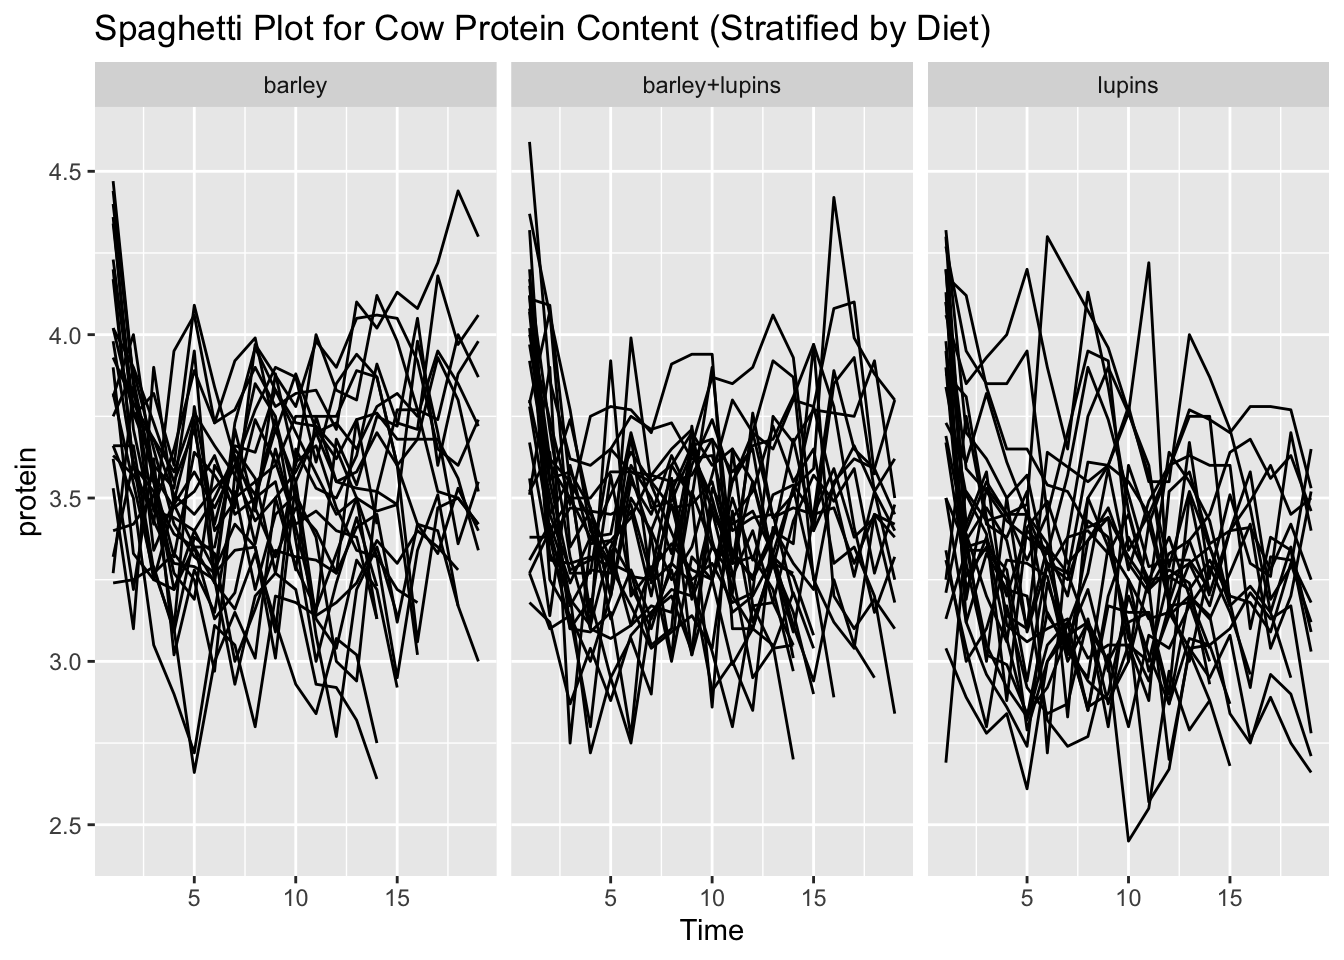 Spaghetti plot of individual cows, stratifiet by diet group.